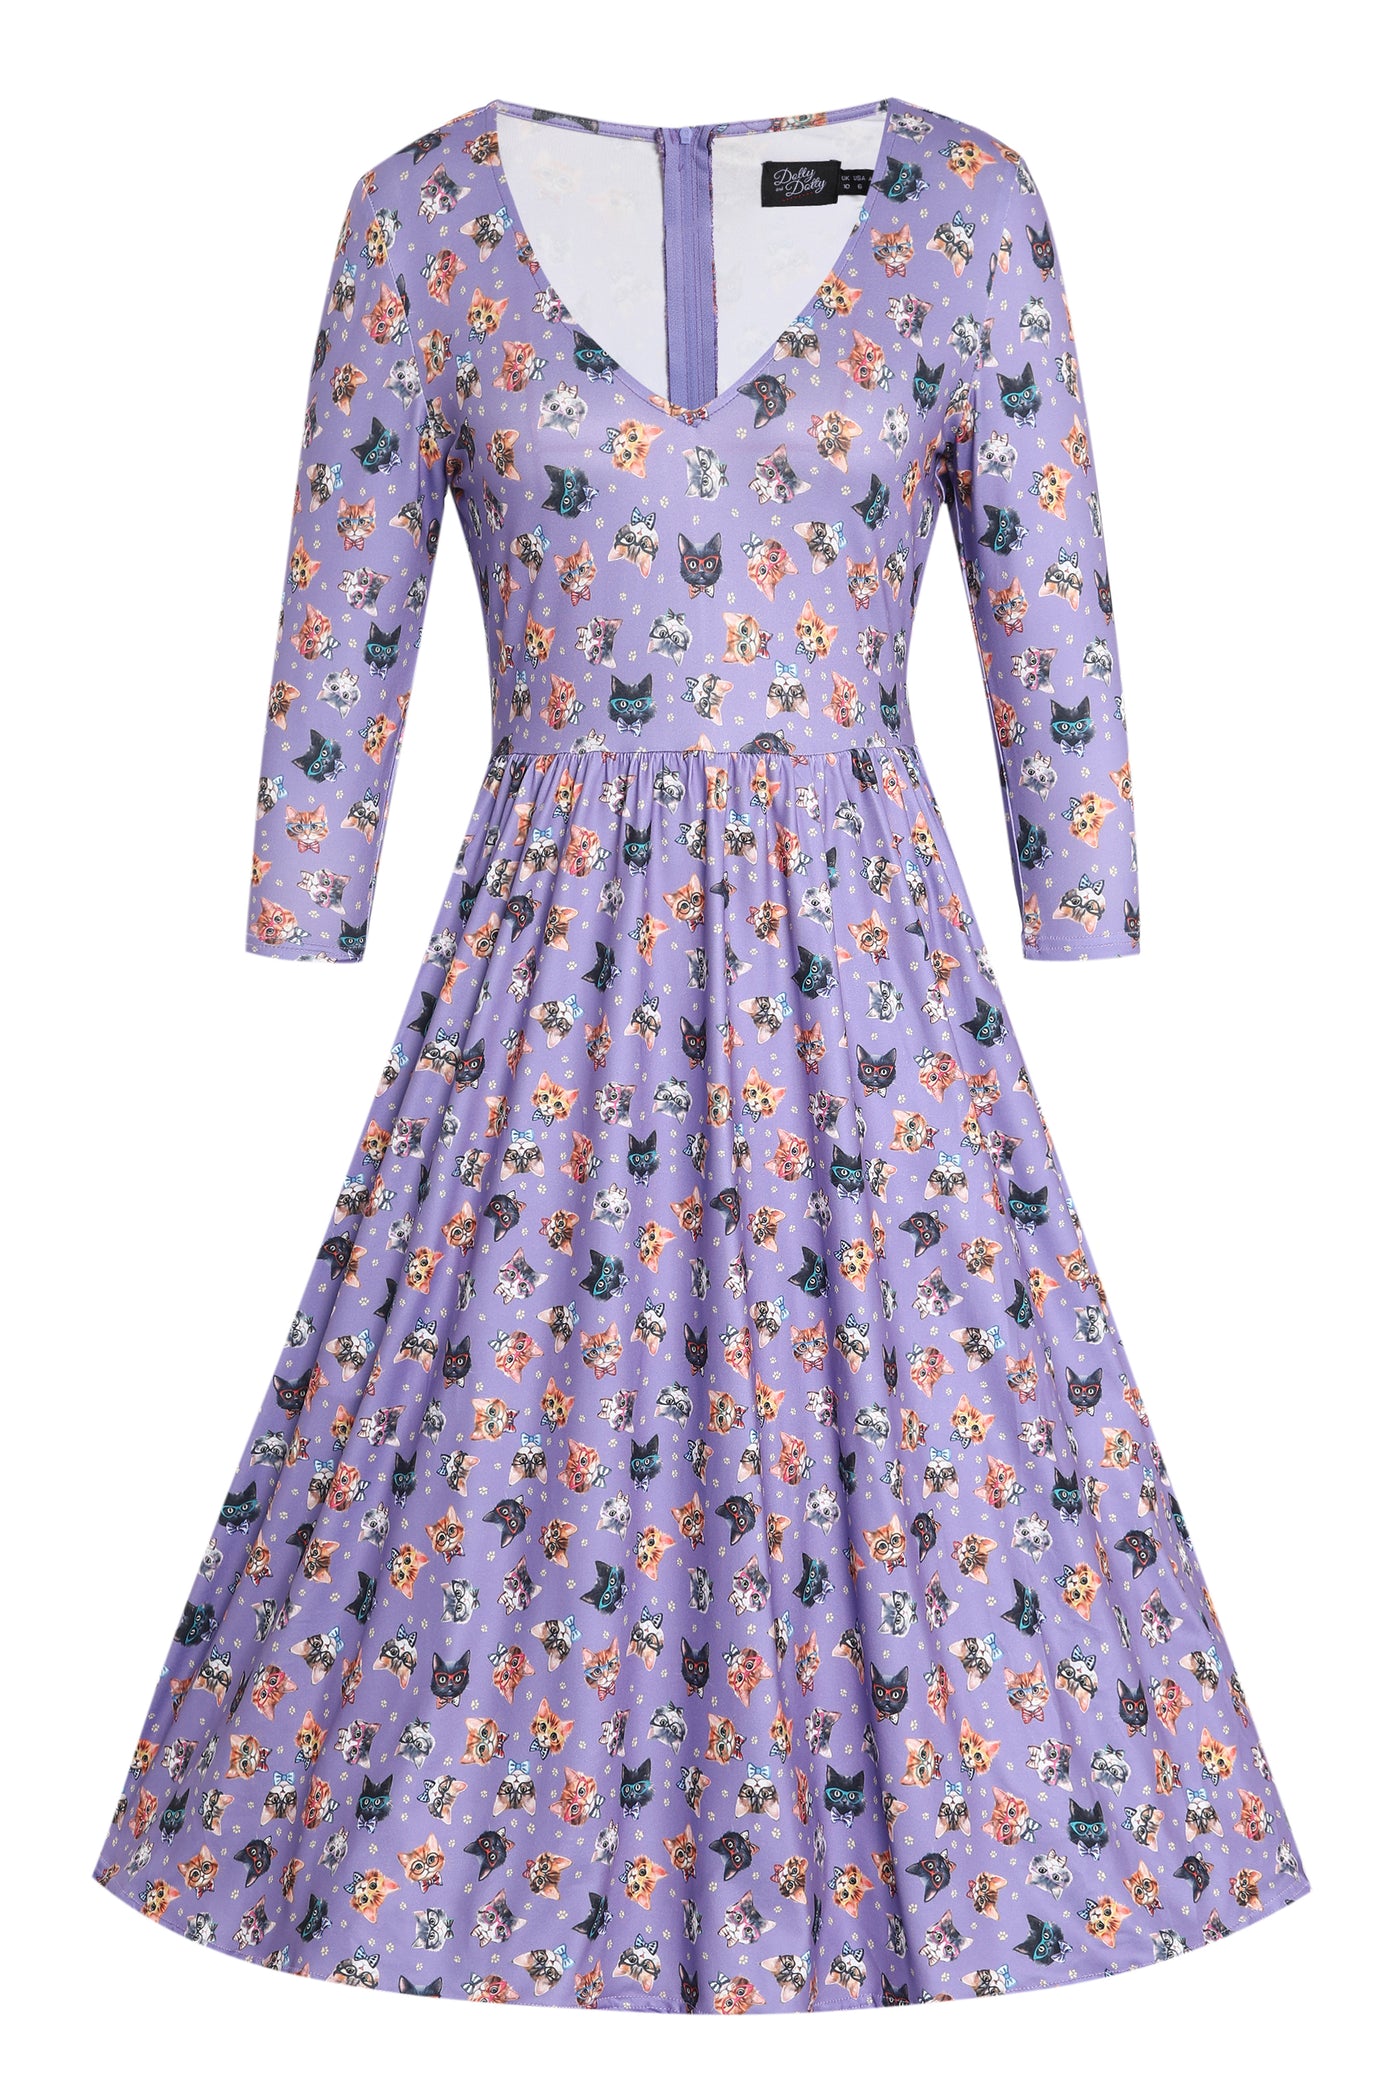 Front View of Nerdy Cat Long Sleeved Dress in Purple